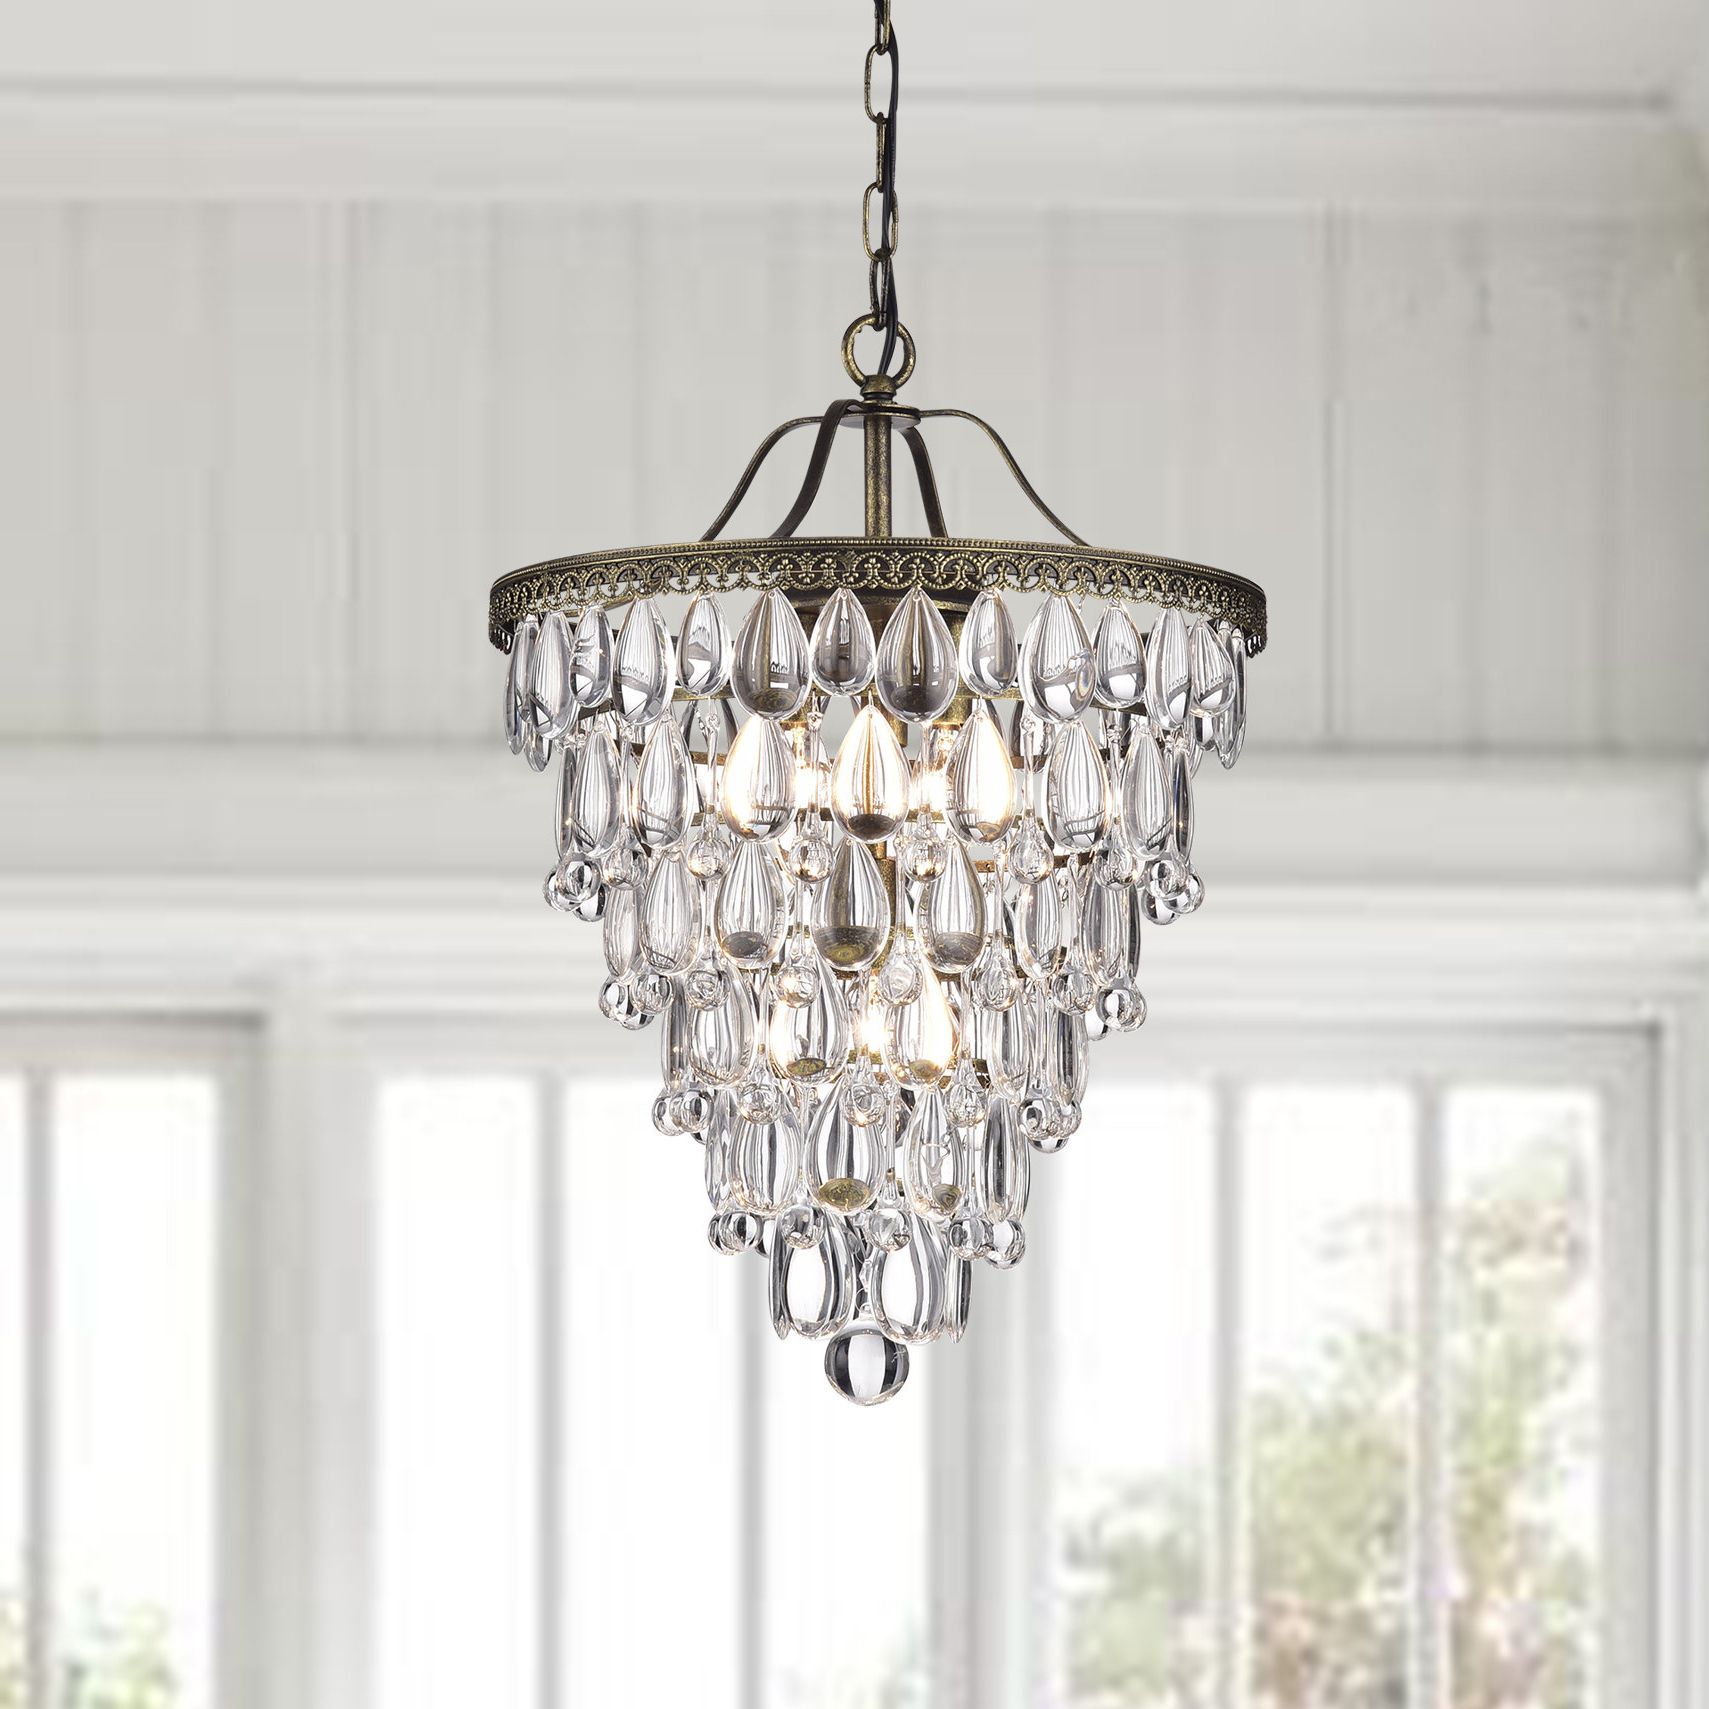 Totnes 4 Light Crystal Chandelier Pertaining To Most Popular Bramers 6 Light Novelty Chandeliers (View 22 of 25)